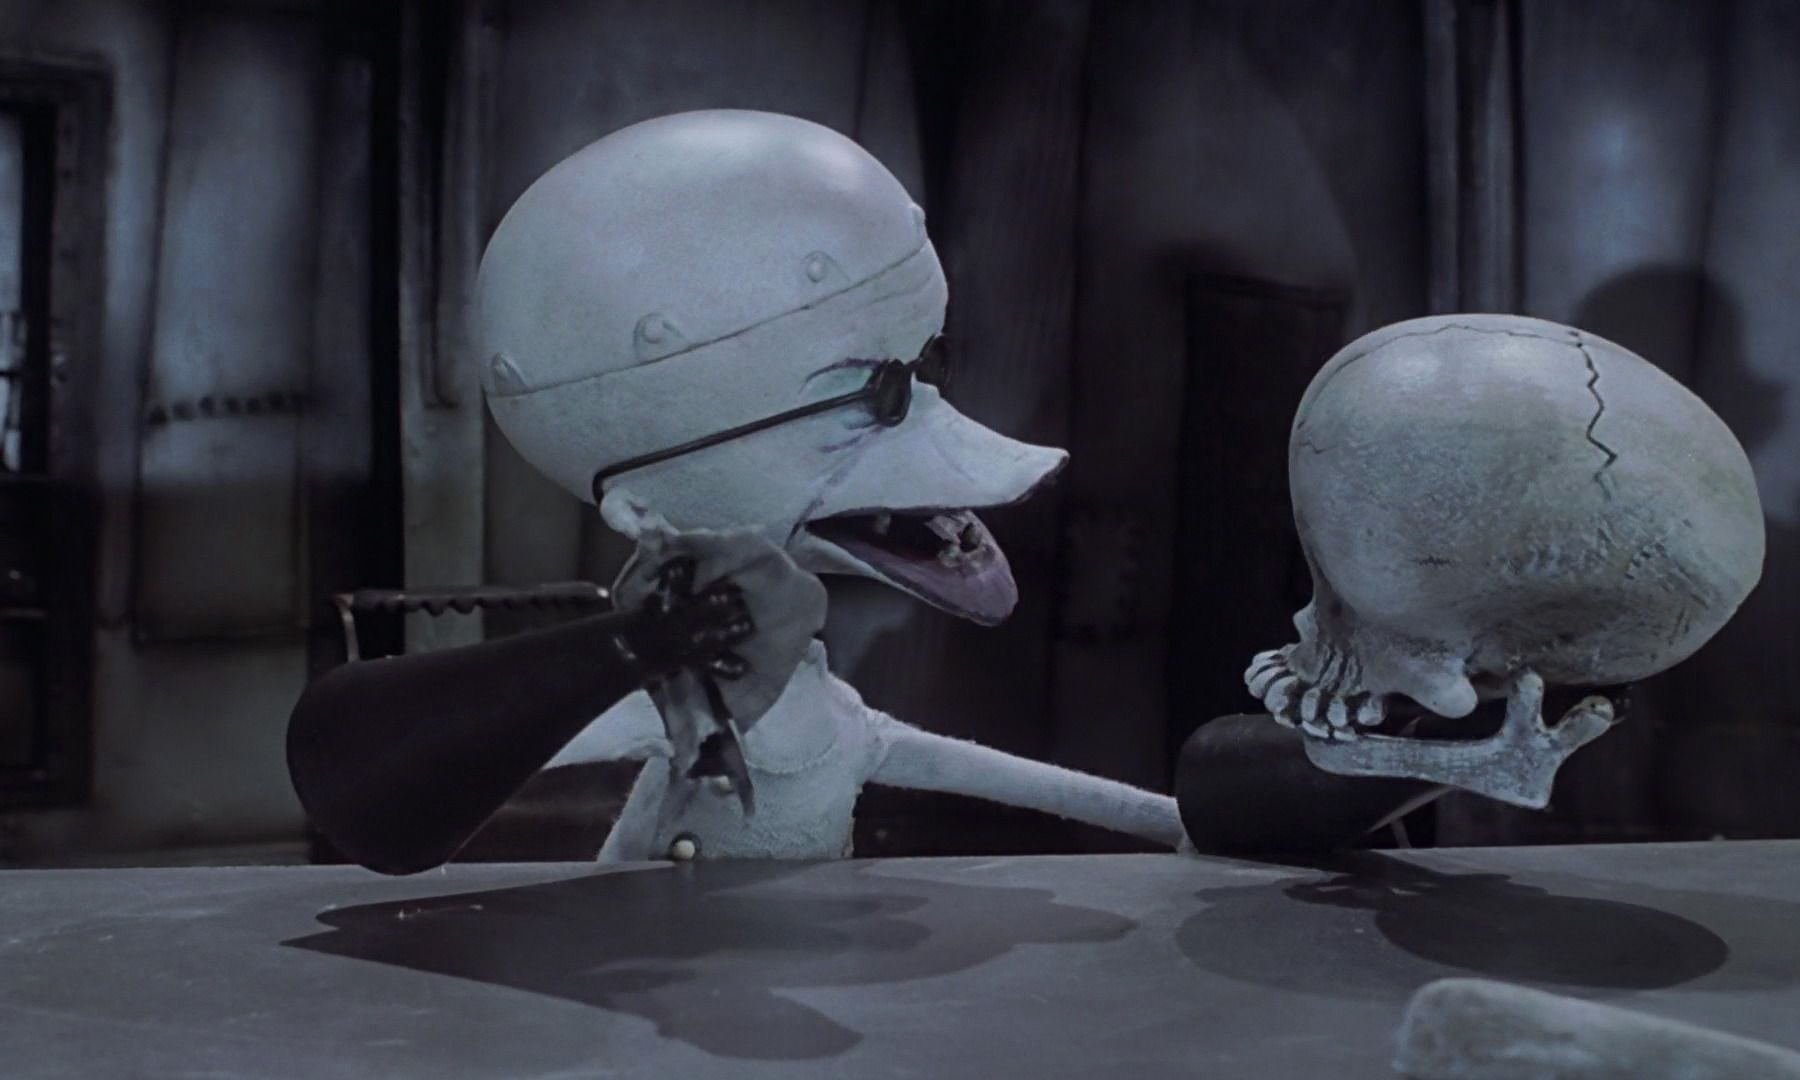 The MyersBriggs® Types Of The Nightmare Before Christmas Characters